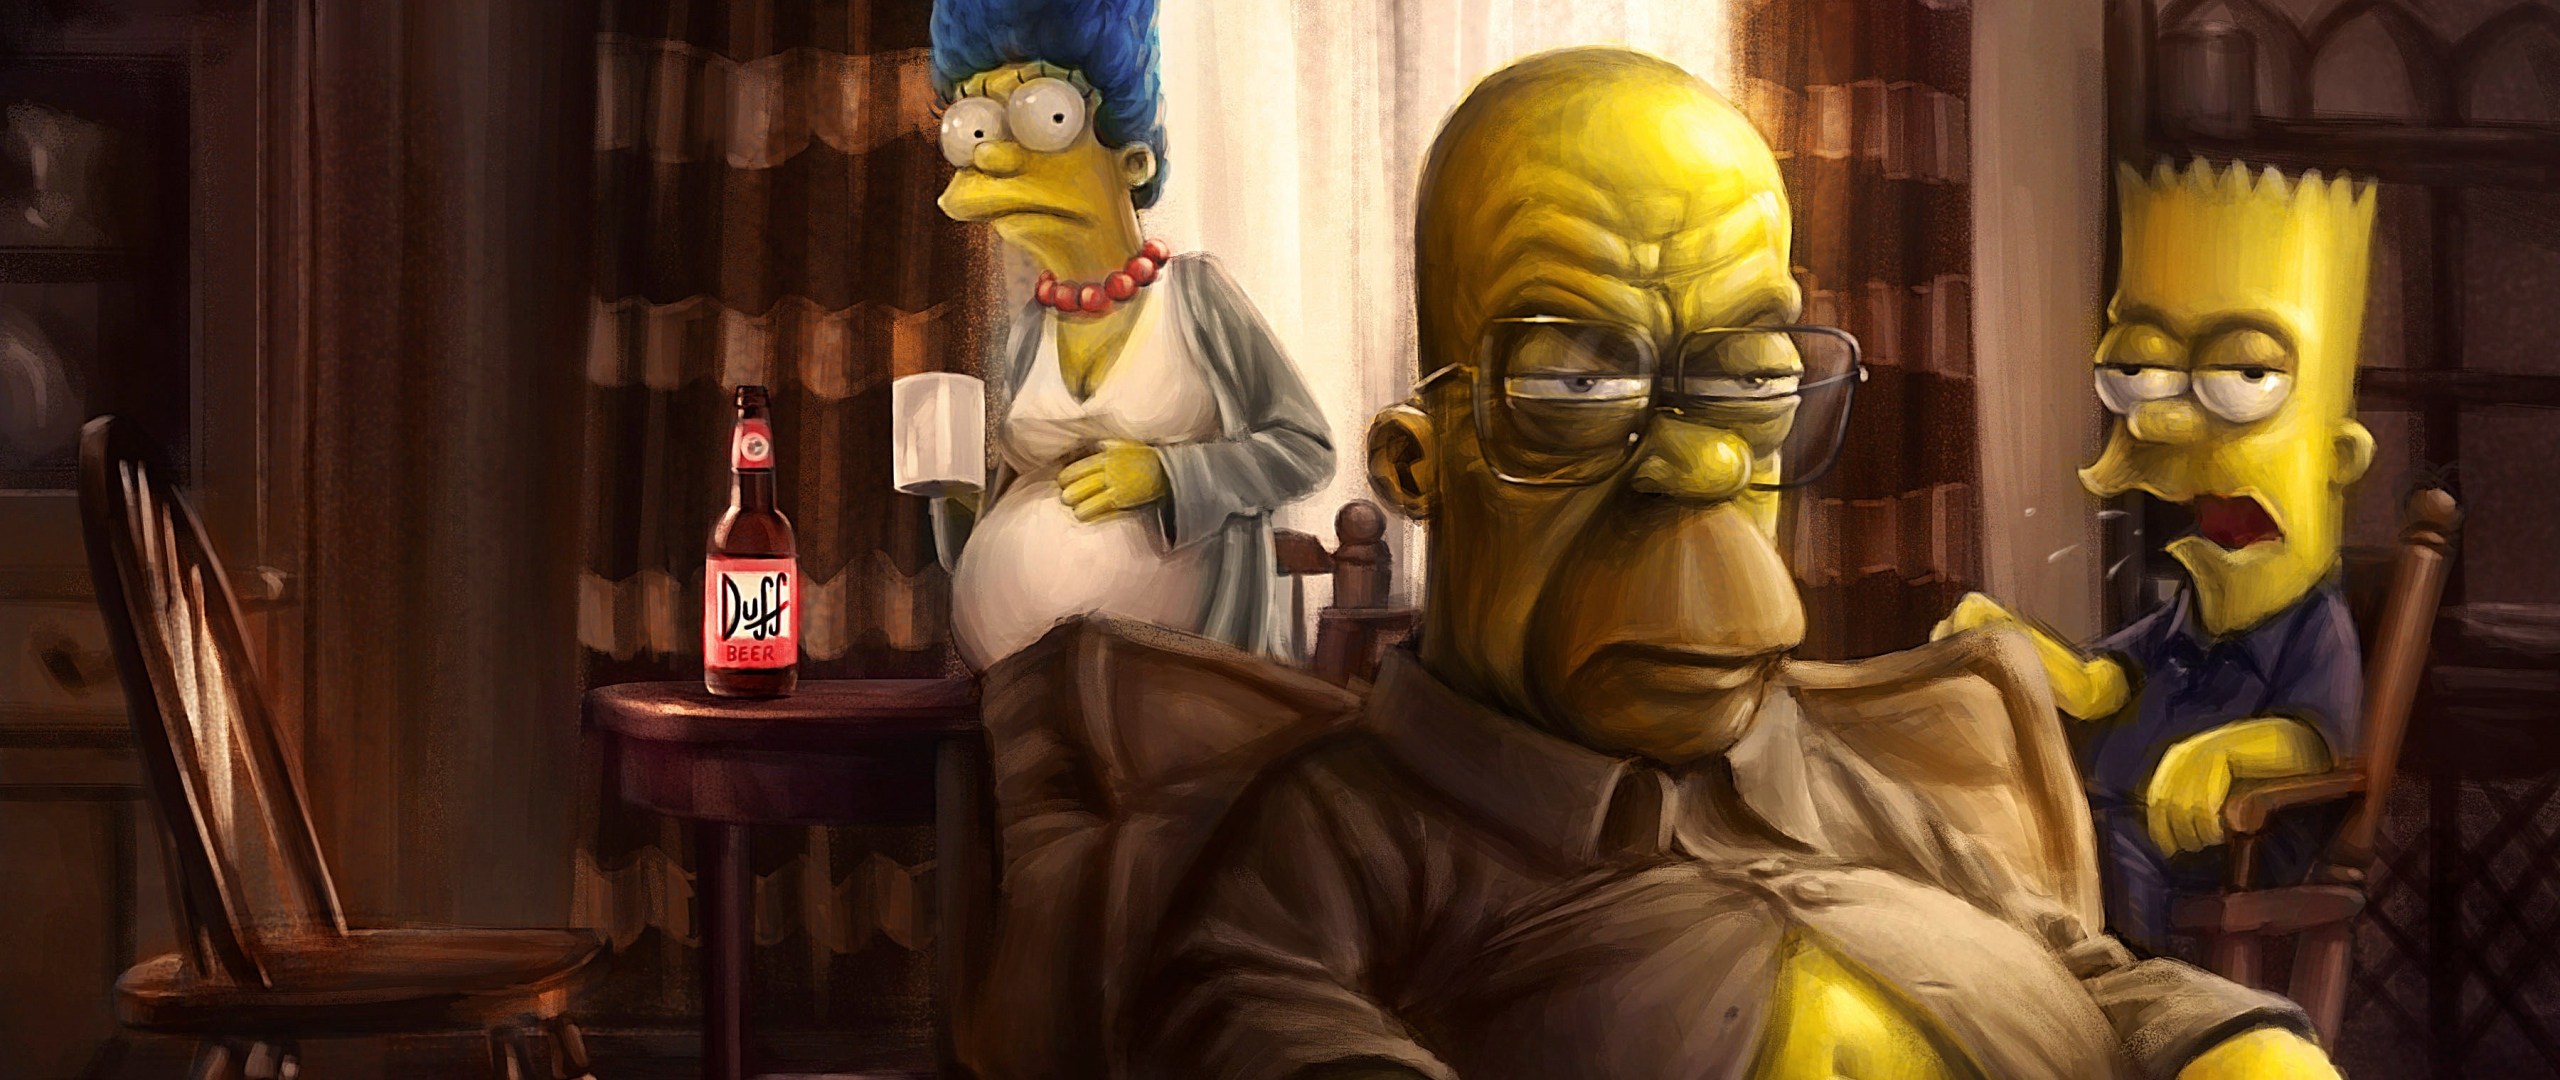 Download Wallpaper 2560x1080 The simpsons, Homer, Marge, Bart, Art ...